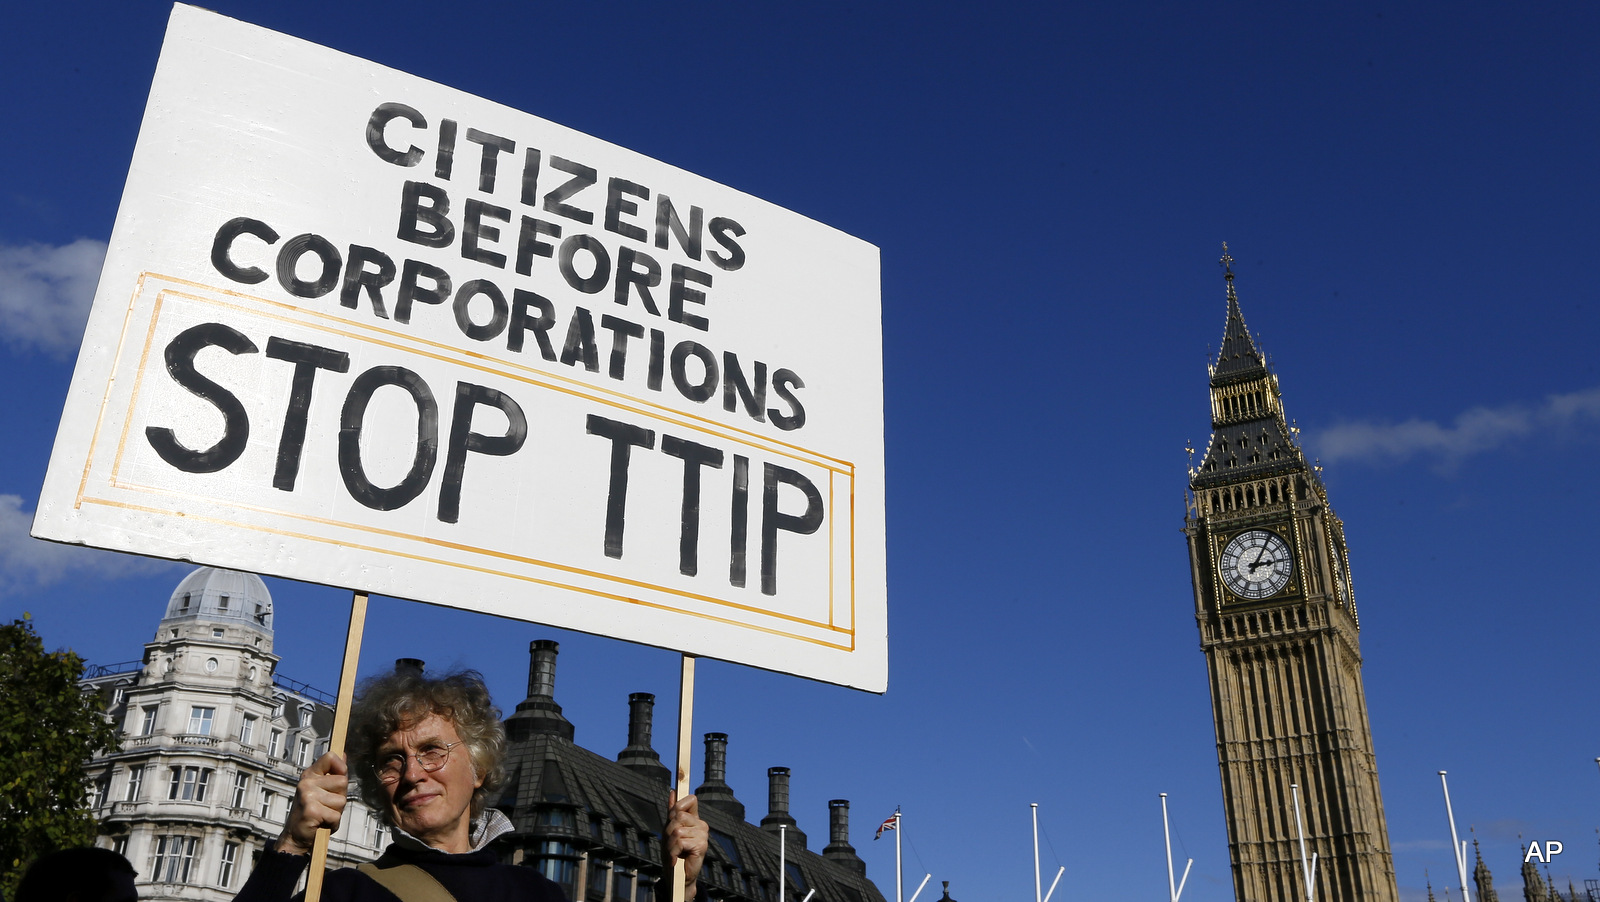 A demonstrator holds a banner in Parliament Square in London, Saturday, Oct. 11, 2014.